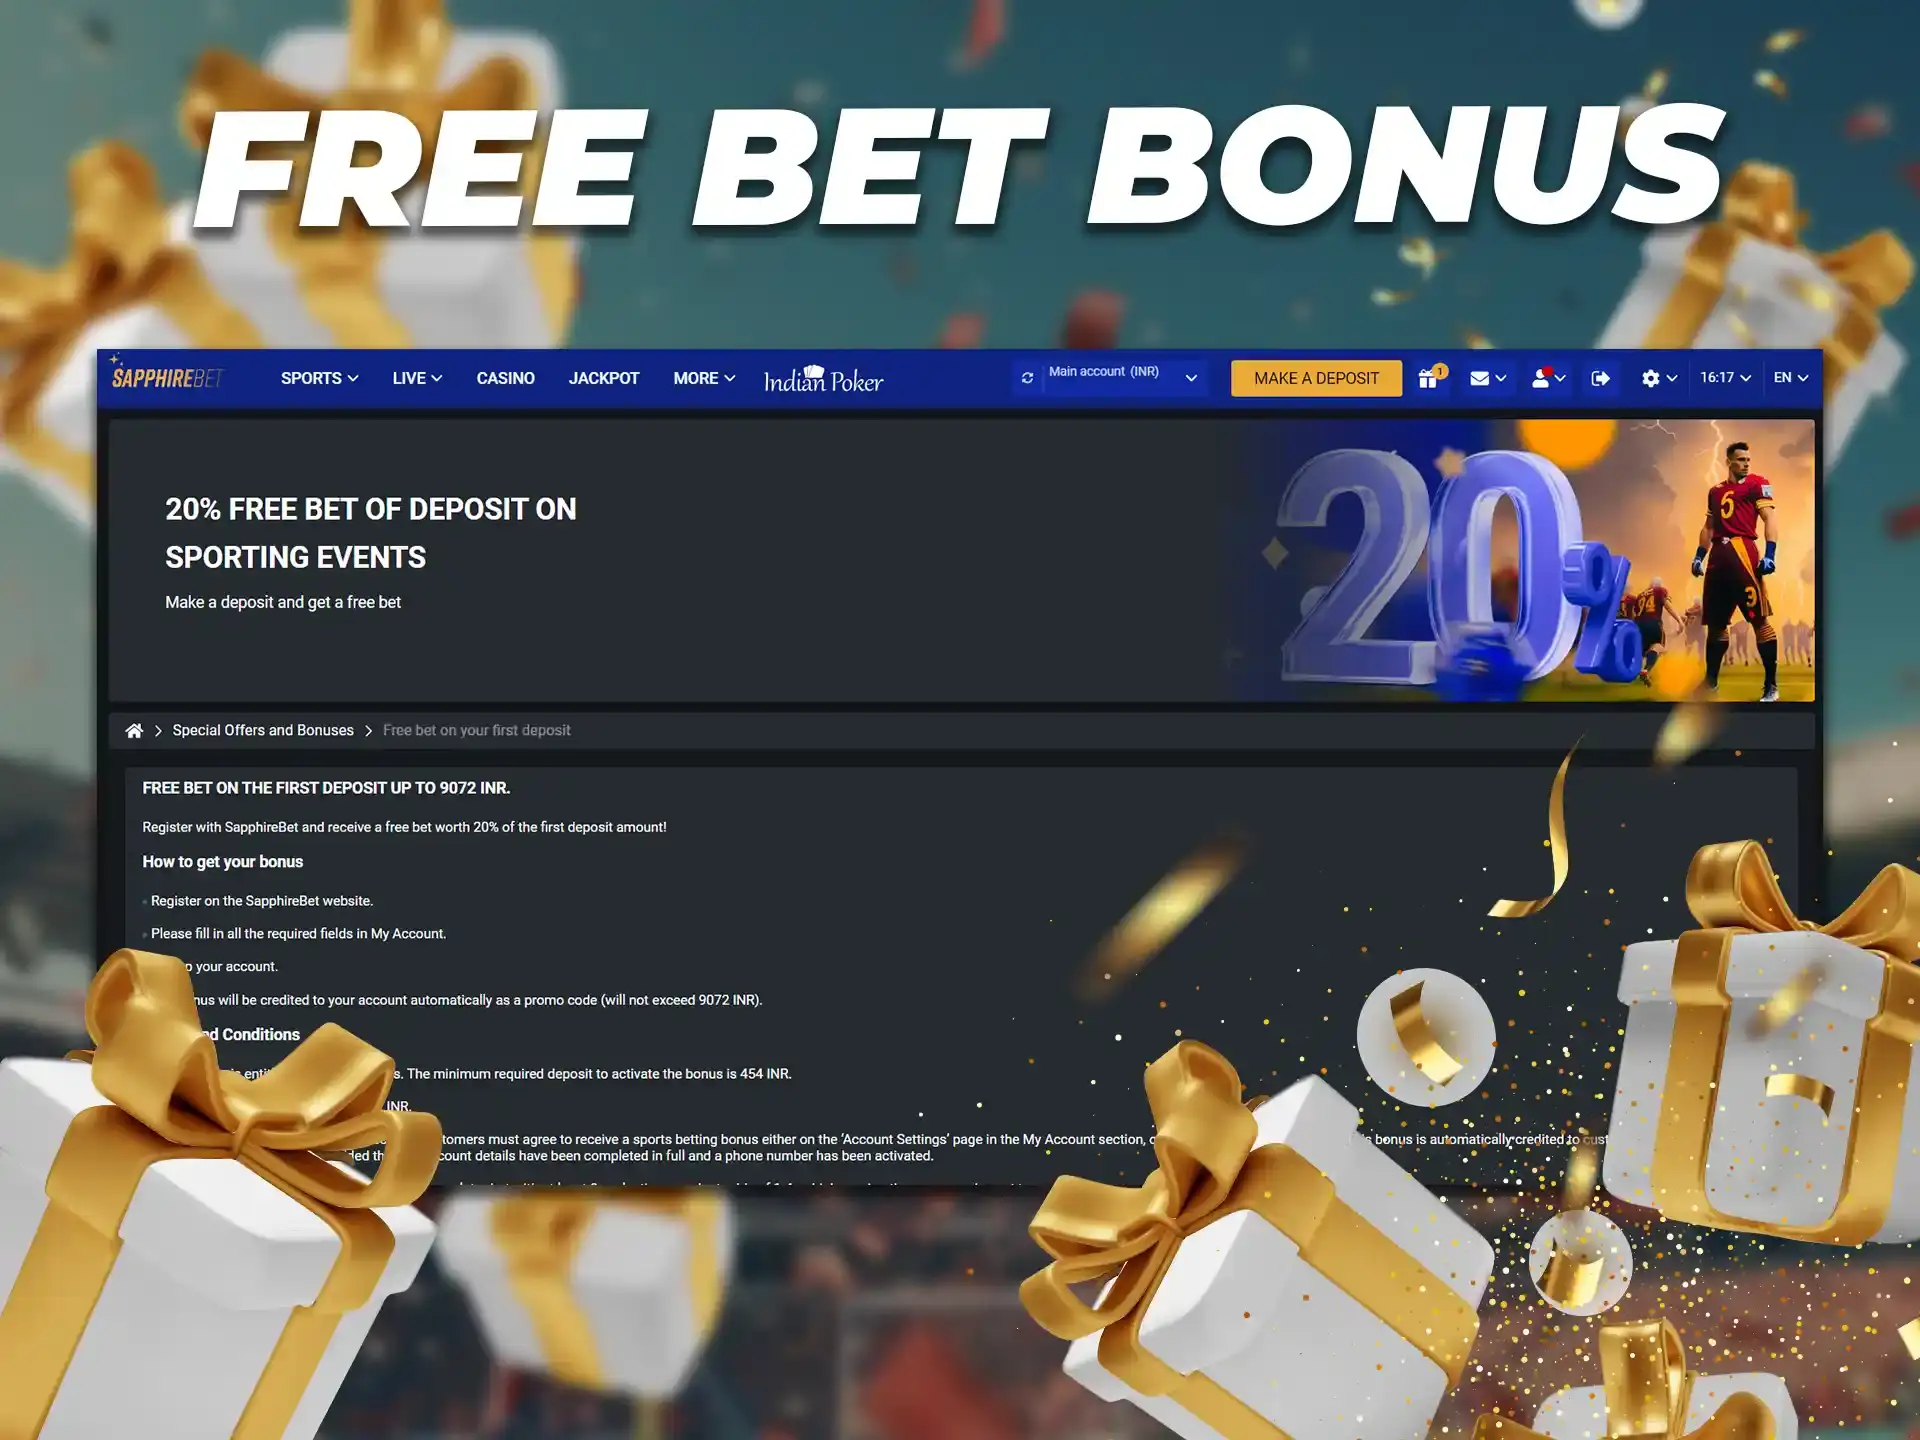 With the Free Bet Bonus, you don't risk any real money.